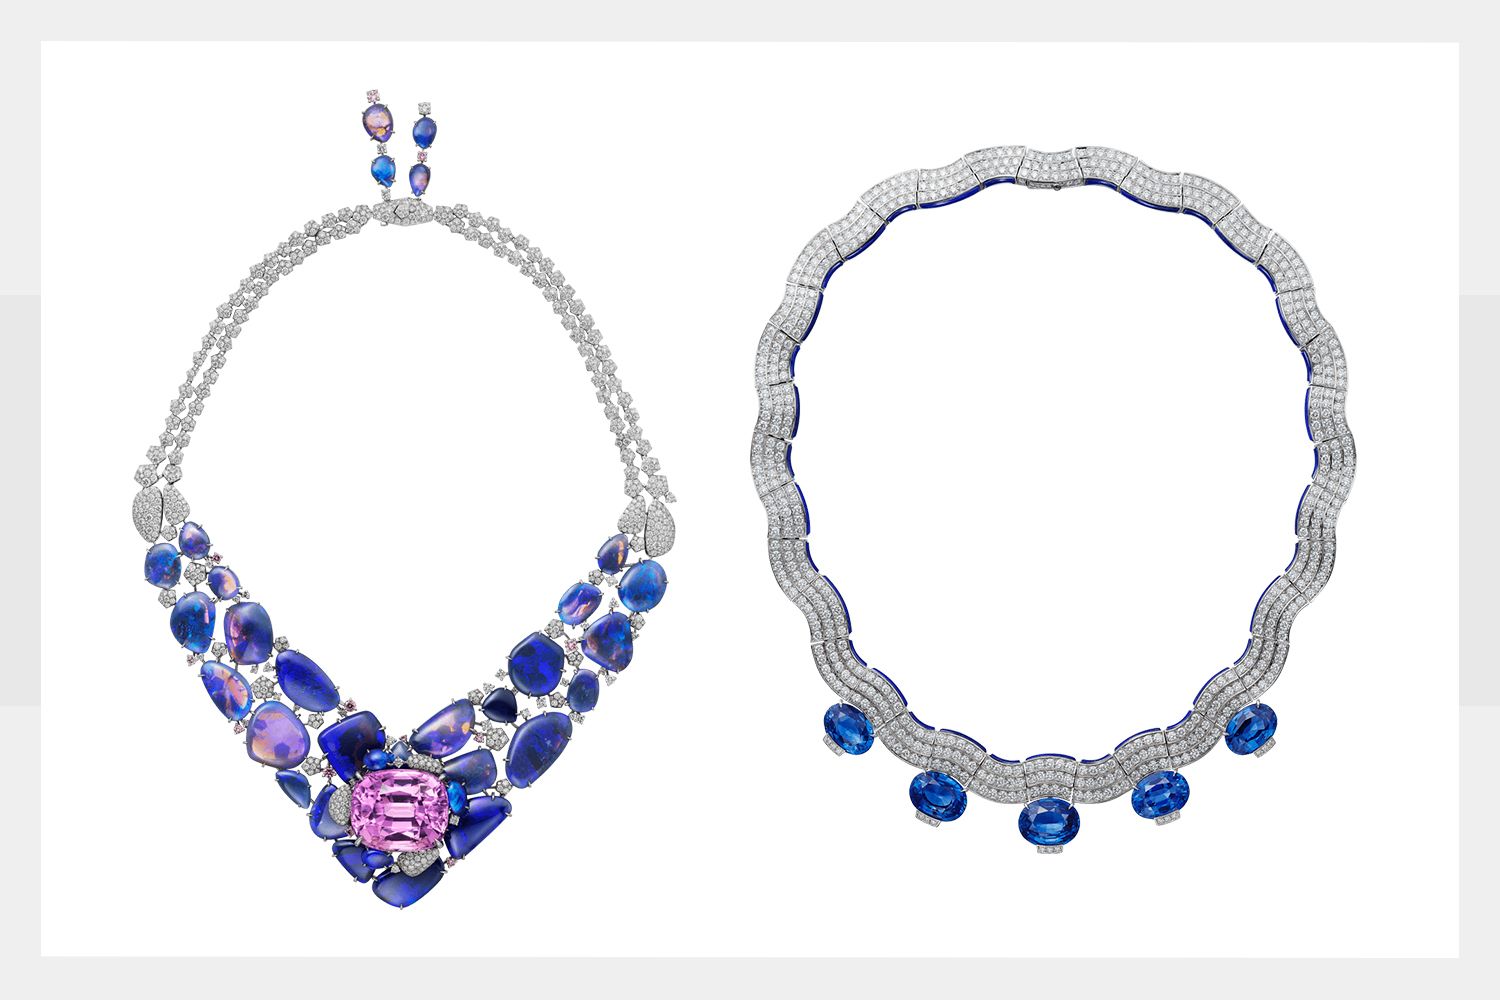 Cartier unveils new high jewellery collection at Couture Week